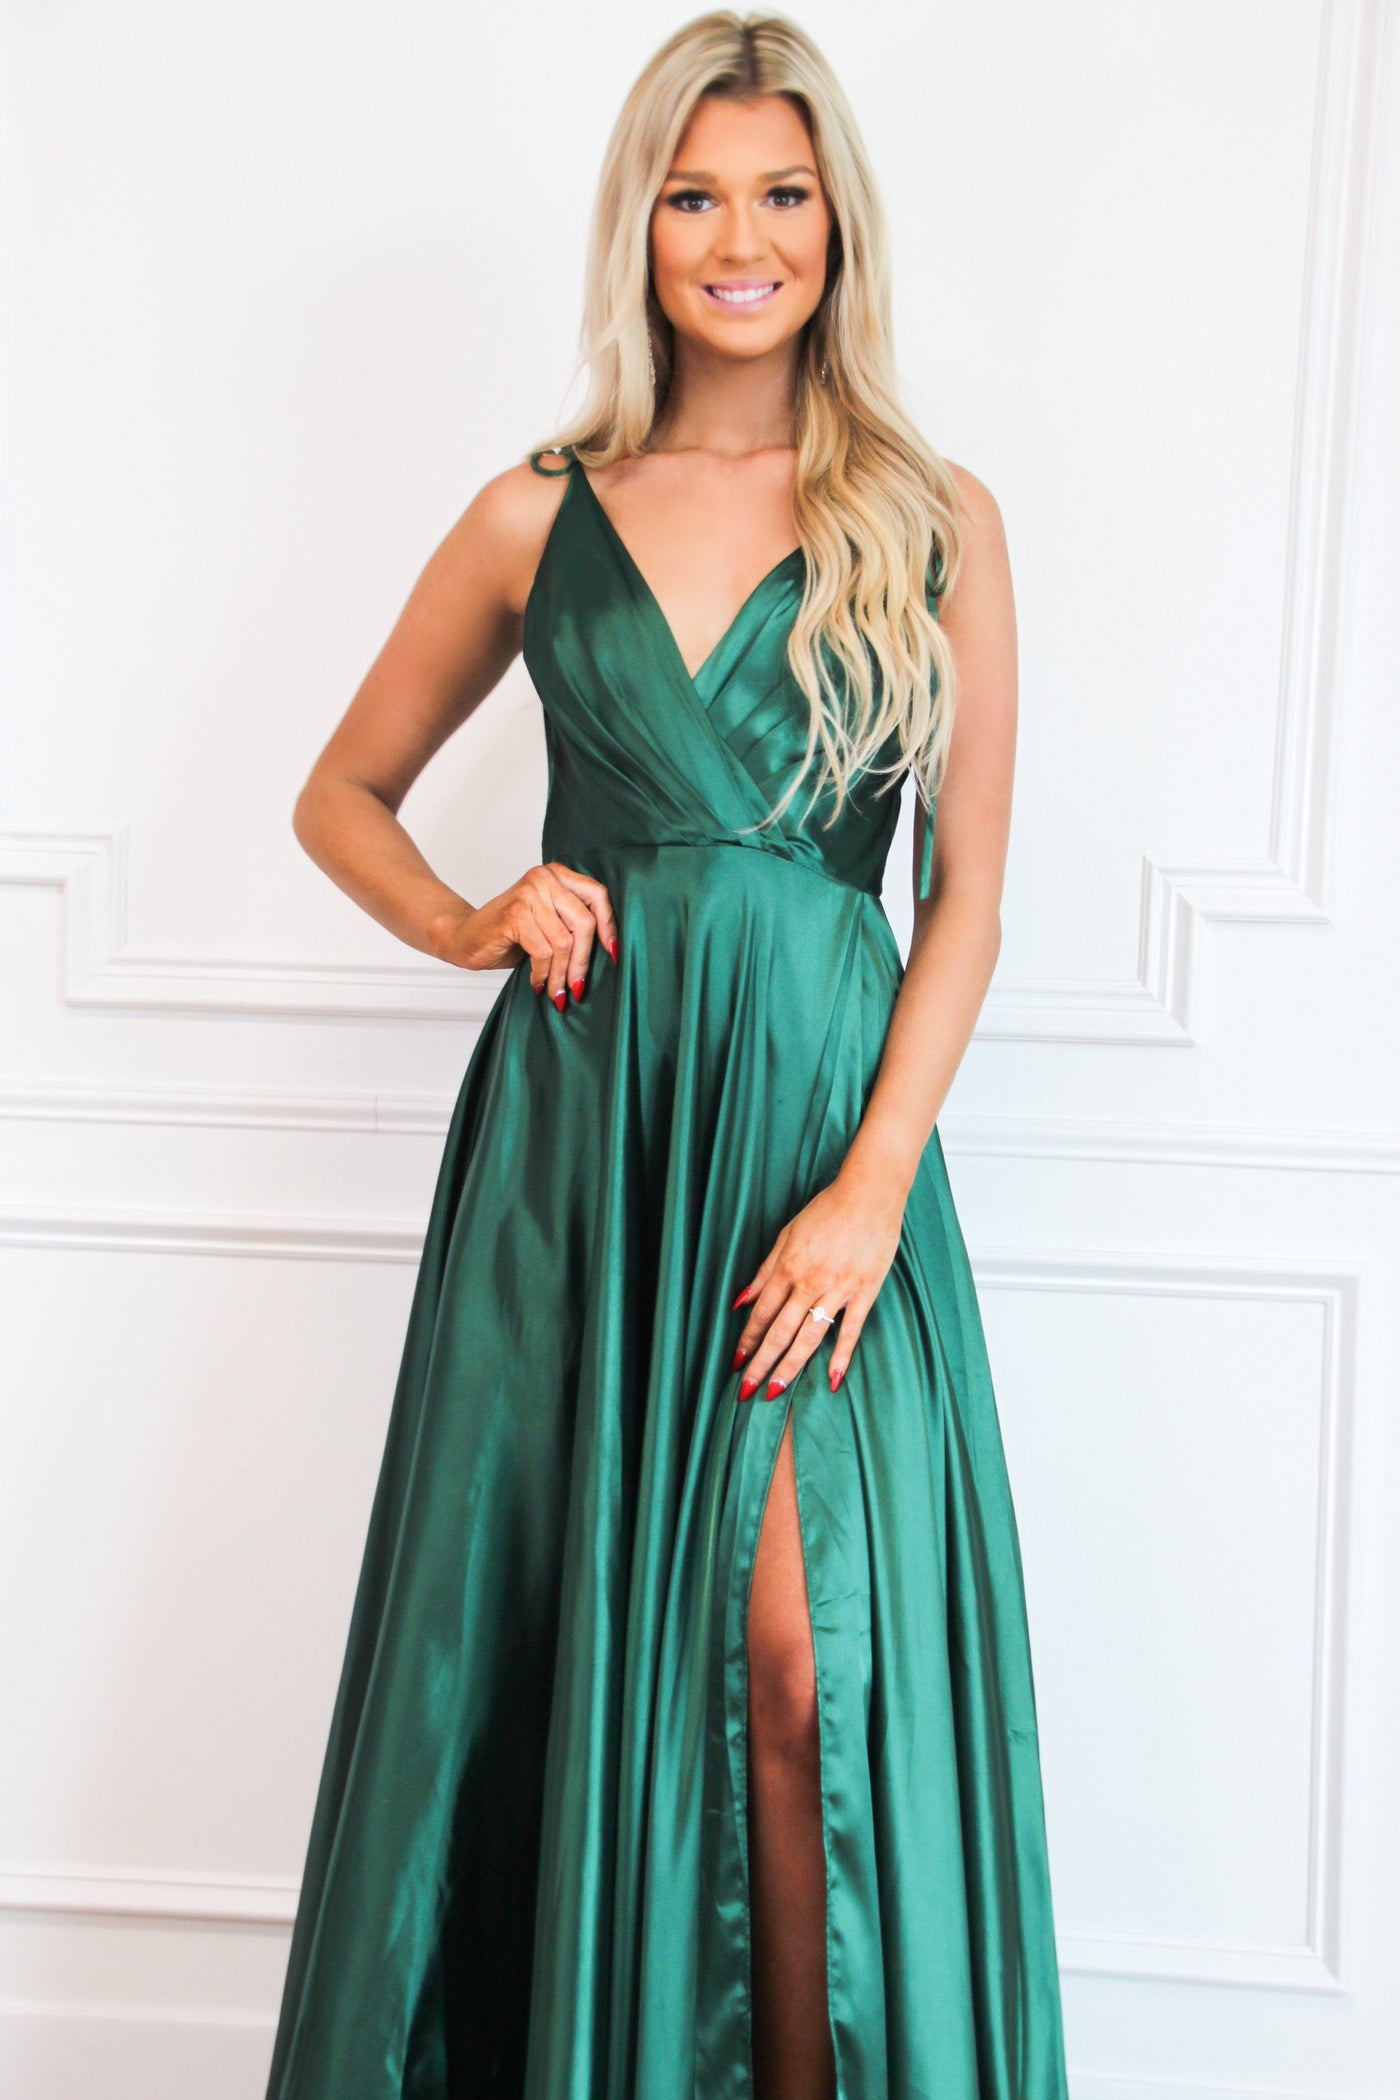 Born to Love You Satin Slit Formal Dress: Emerald - Bella and Bloom Boutique